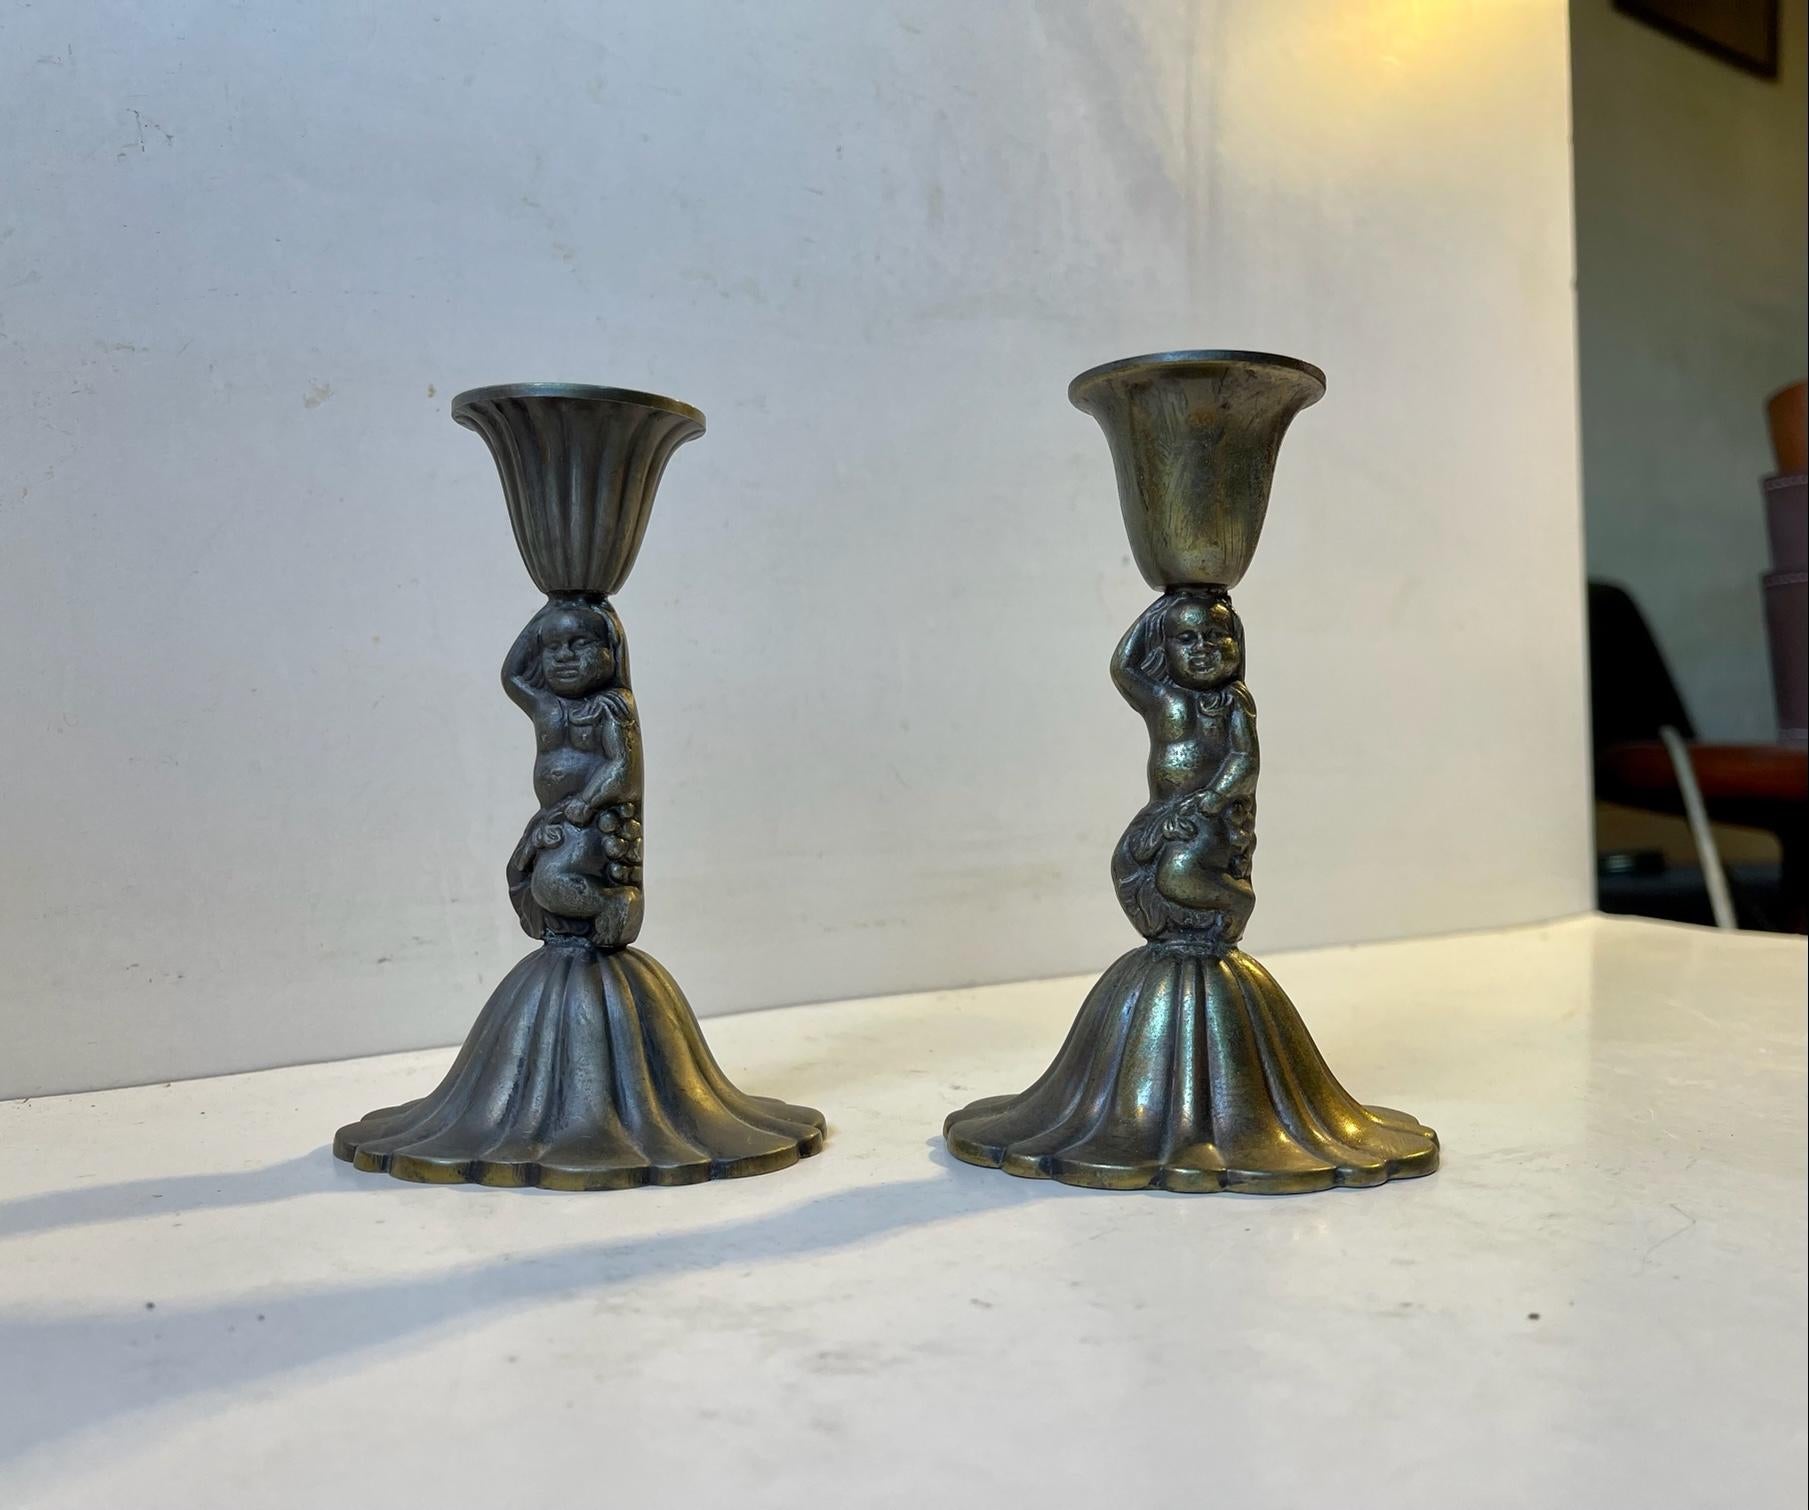 Vintage Italian Candleholders with Cherubs, 1940s For Sale 3